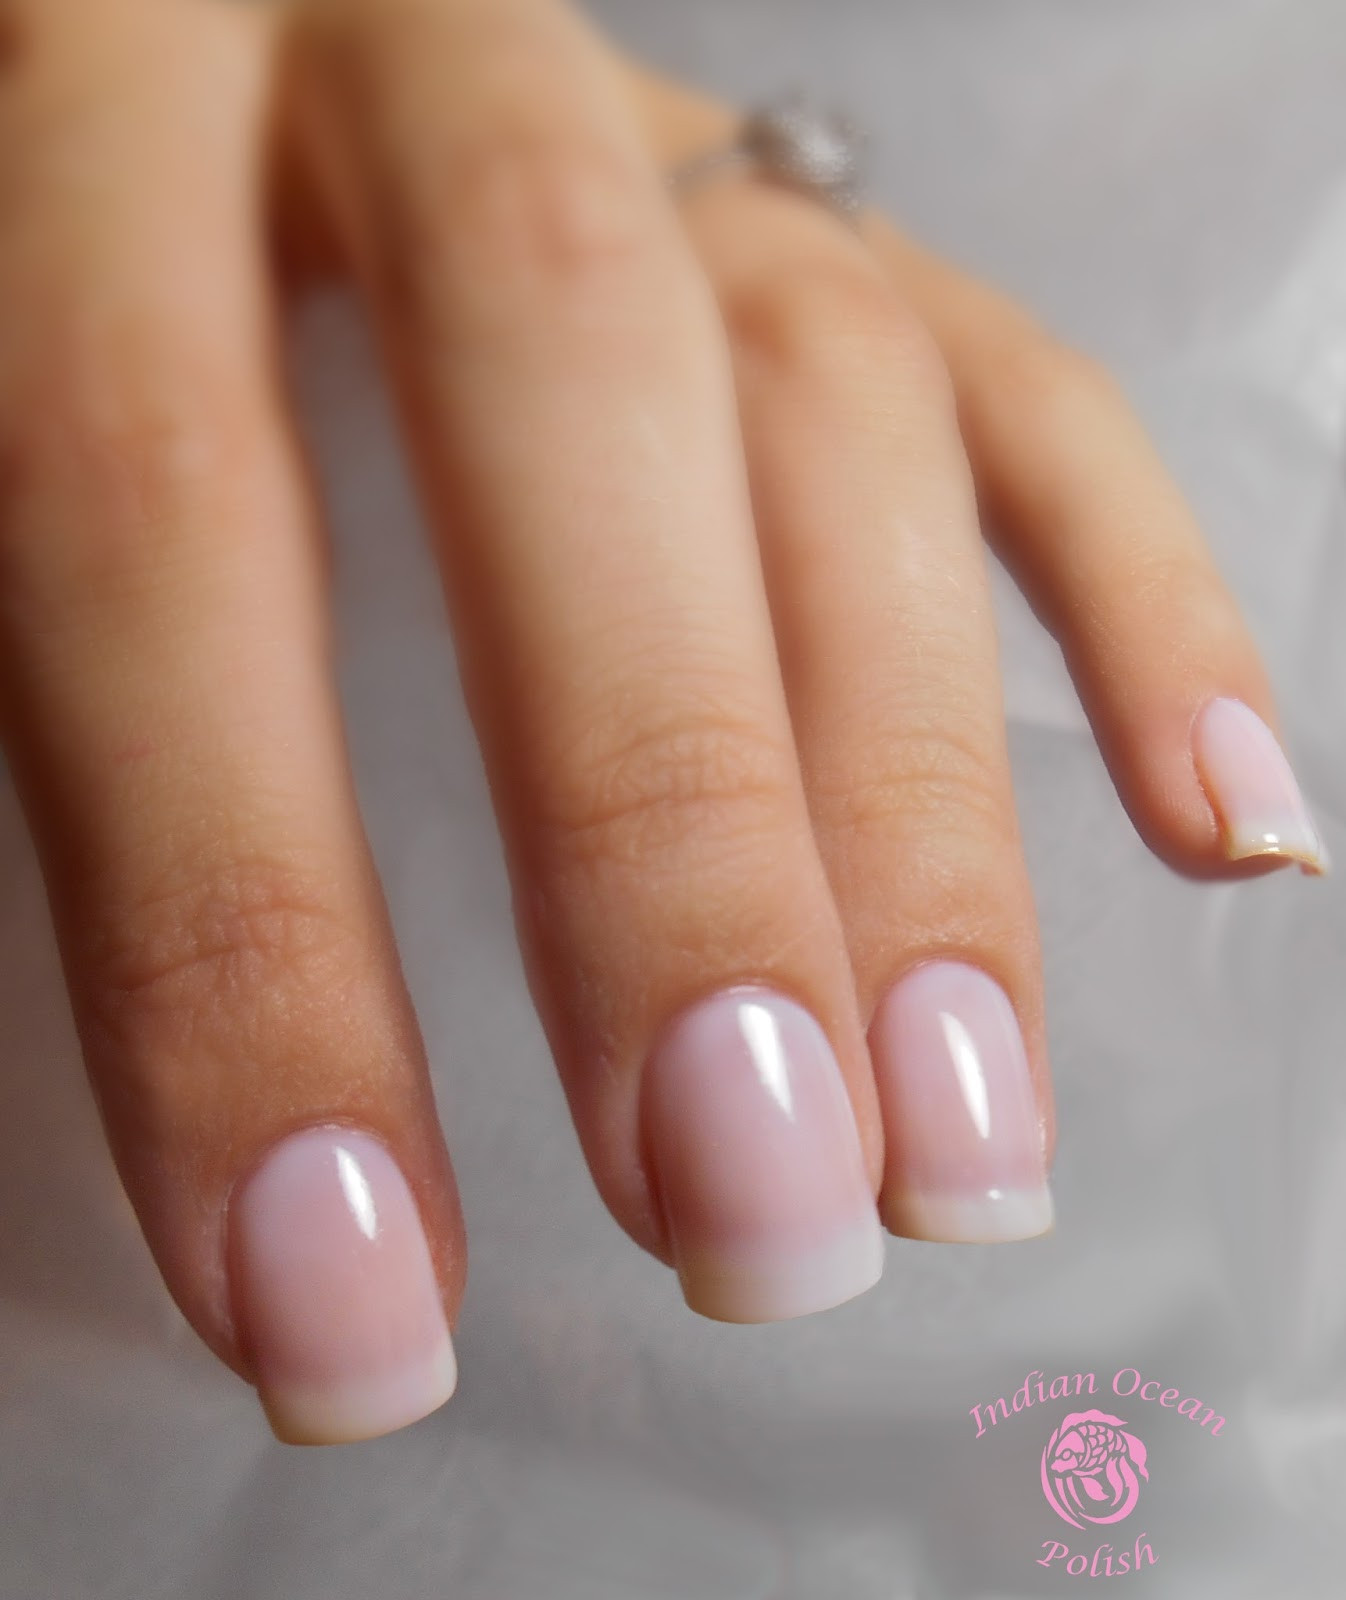 Wedding Nails For Bride
 Indian Ocean Polish August 2013